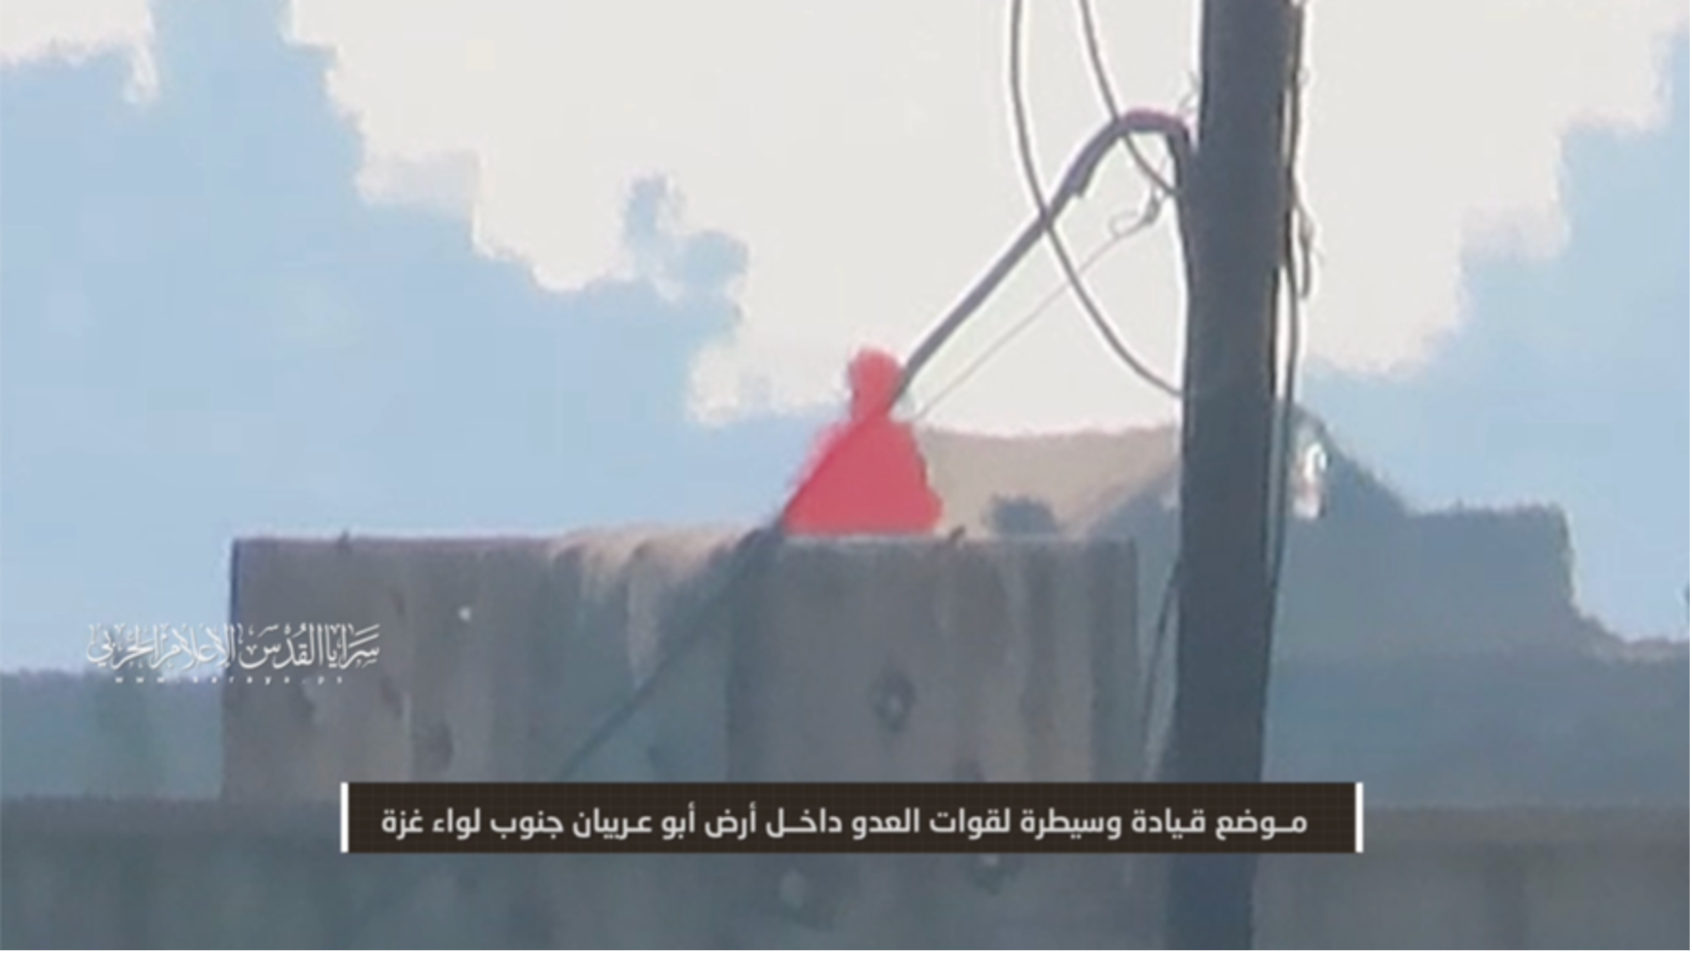 AQB video still showing the surveillance of an alleged “command and control position.” (Source: Telegram)